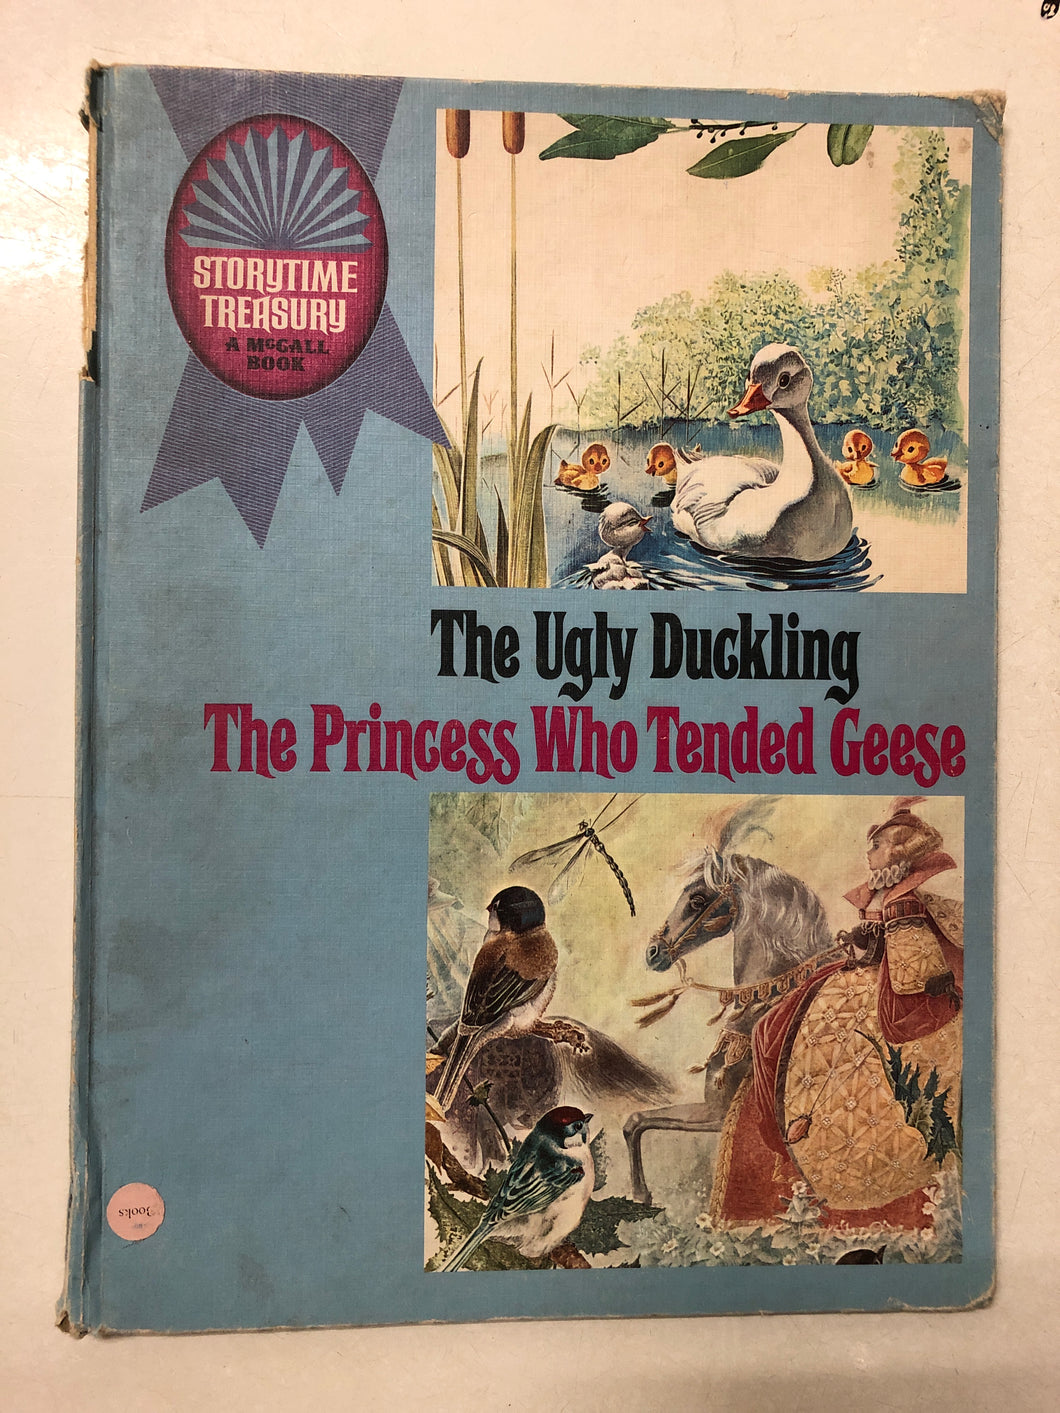 The Ugly Duckling The Princess Who Tended Geese - Slick Cat Books 